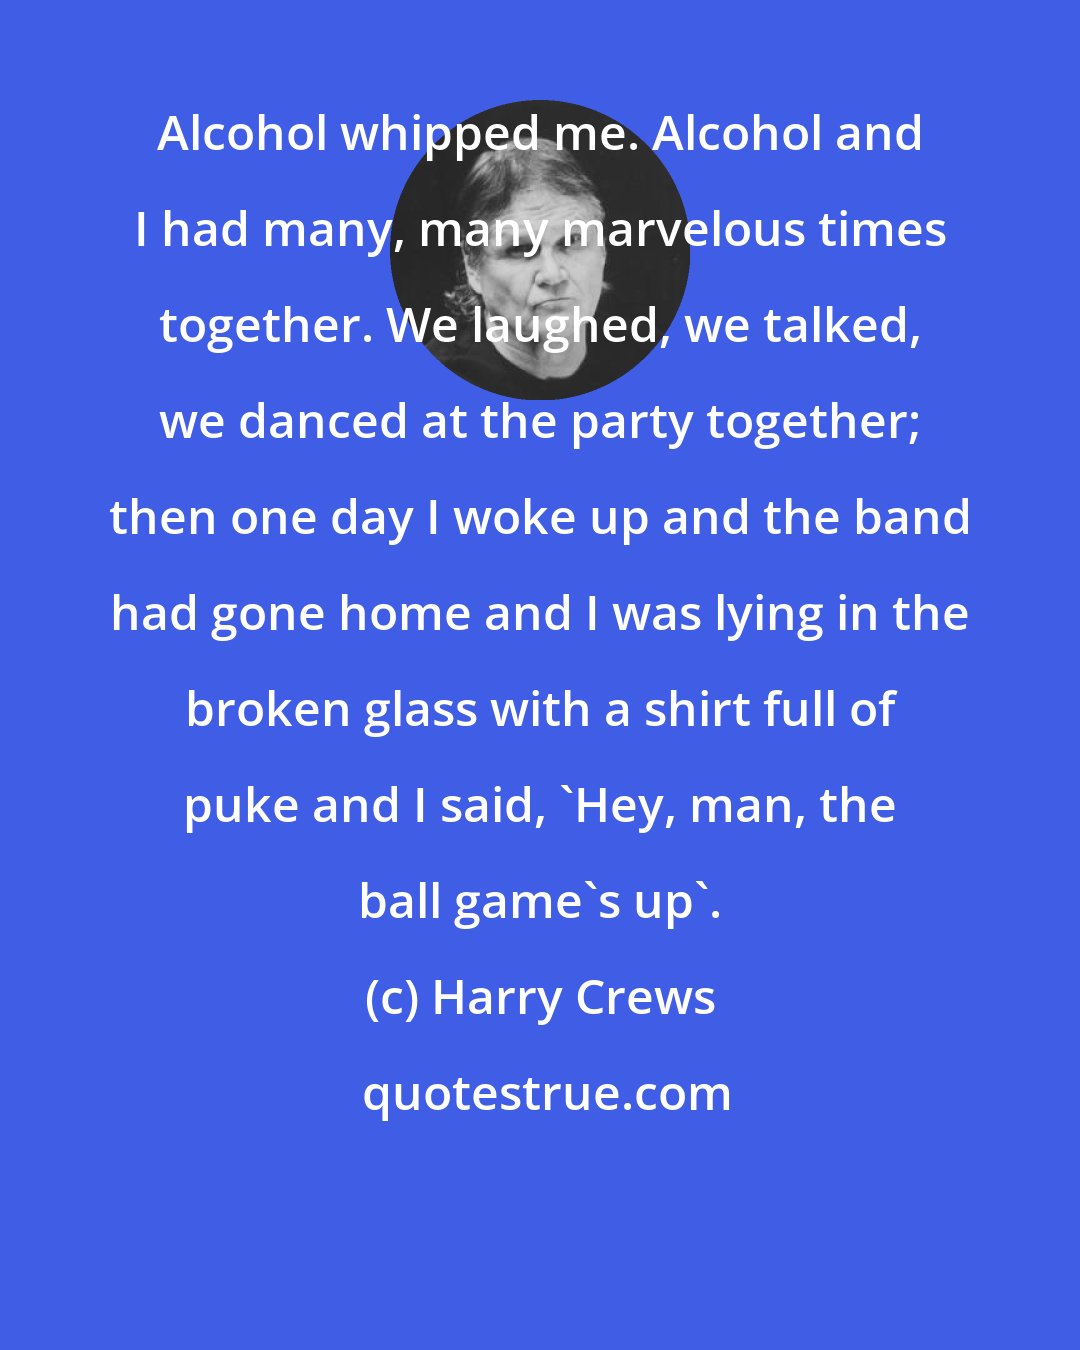 Harry Crews: Alcohol whipped me. Alcohol and I had many, many marvelous times together. We laughed, we talked, we danced at the party together; then one day I woke up and the band had gone home and I was lying in the broken glass with a shirt full of puke and I said, 'Hey, man, the ball game's up'.